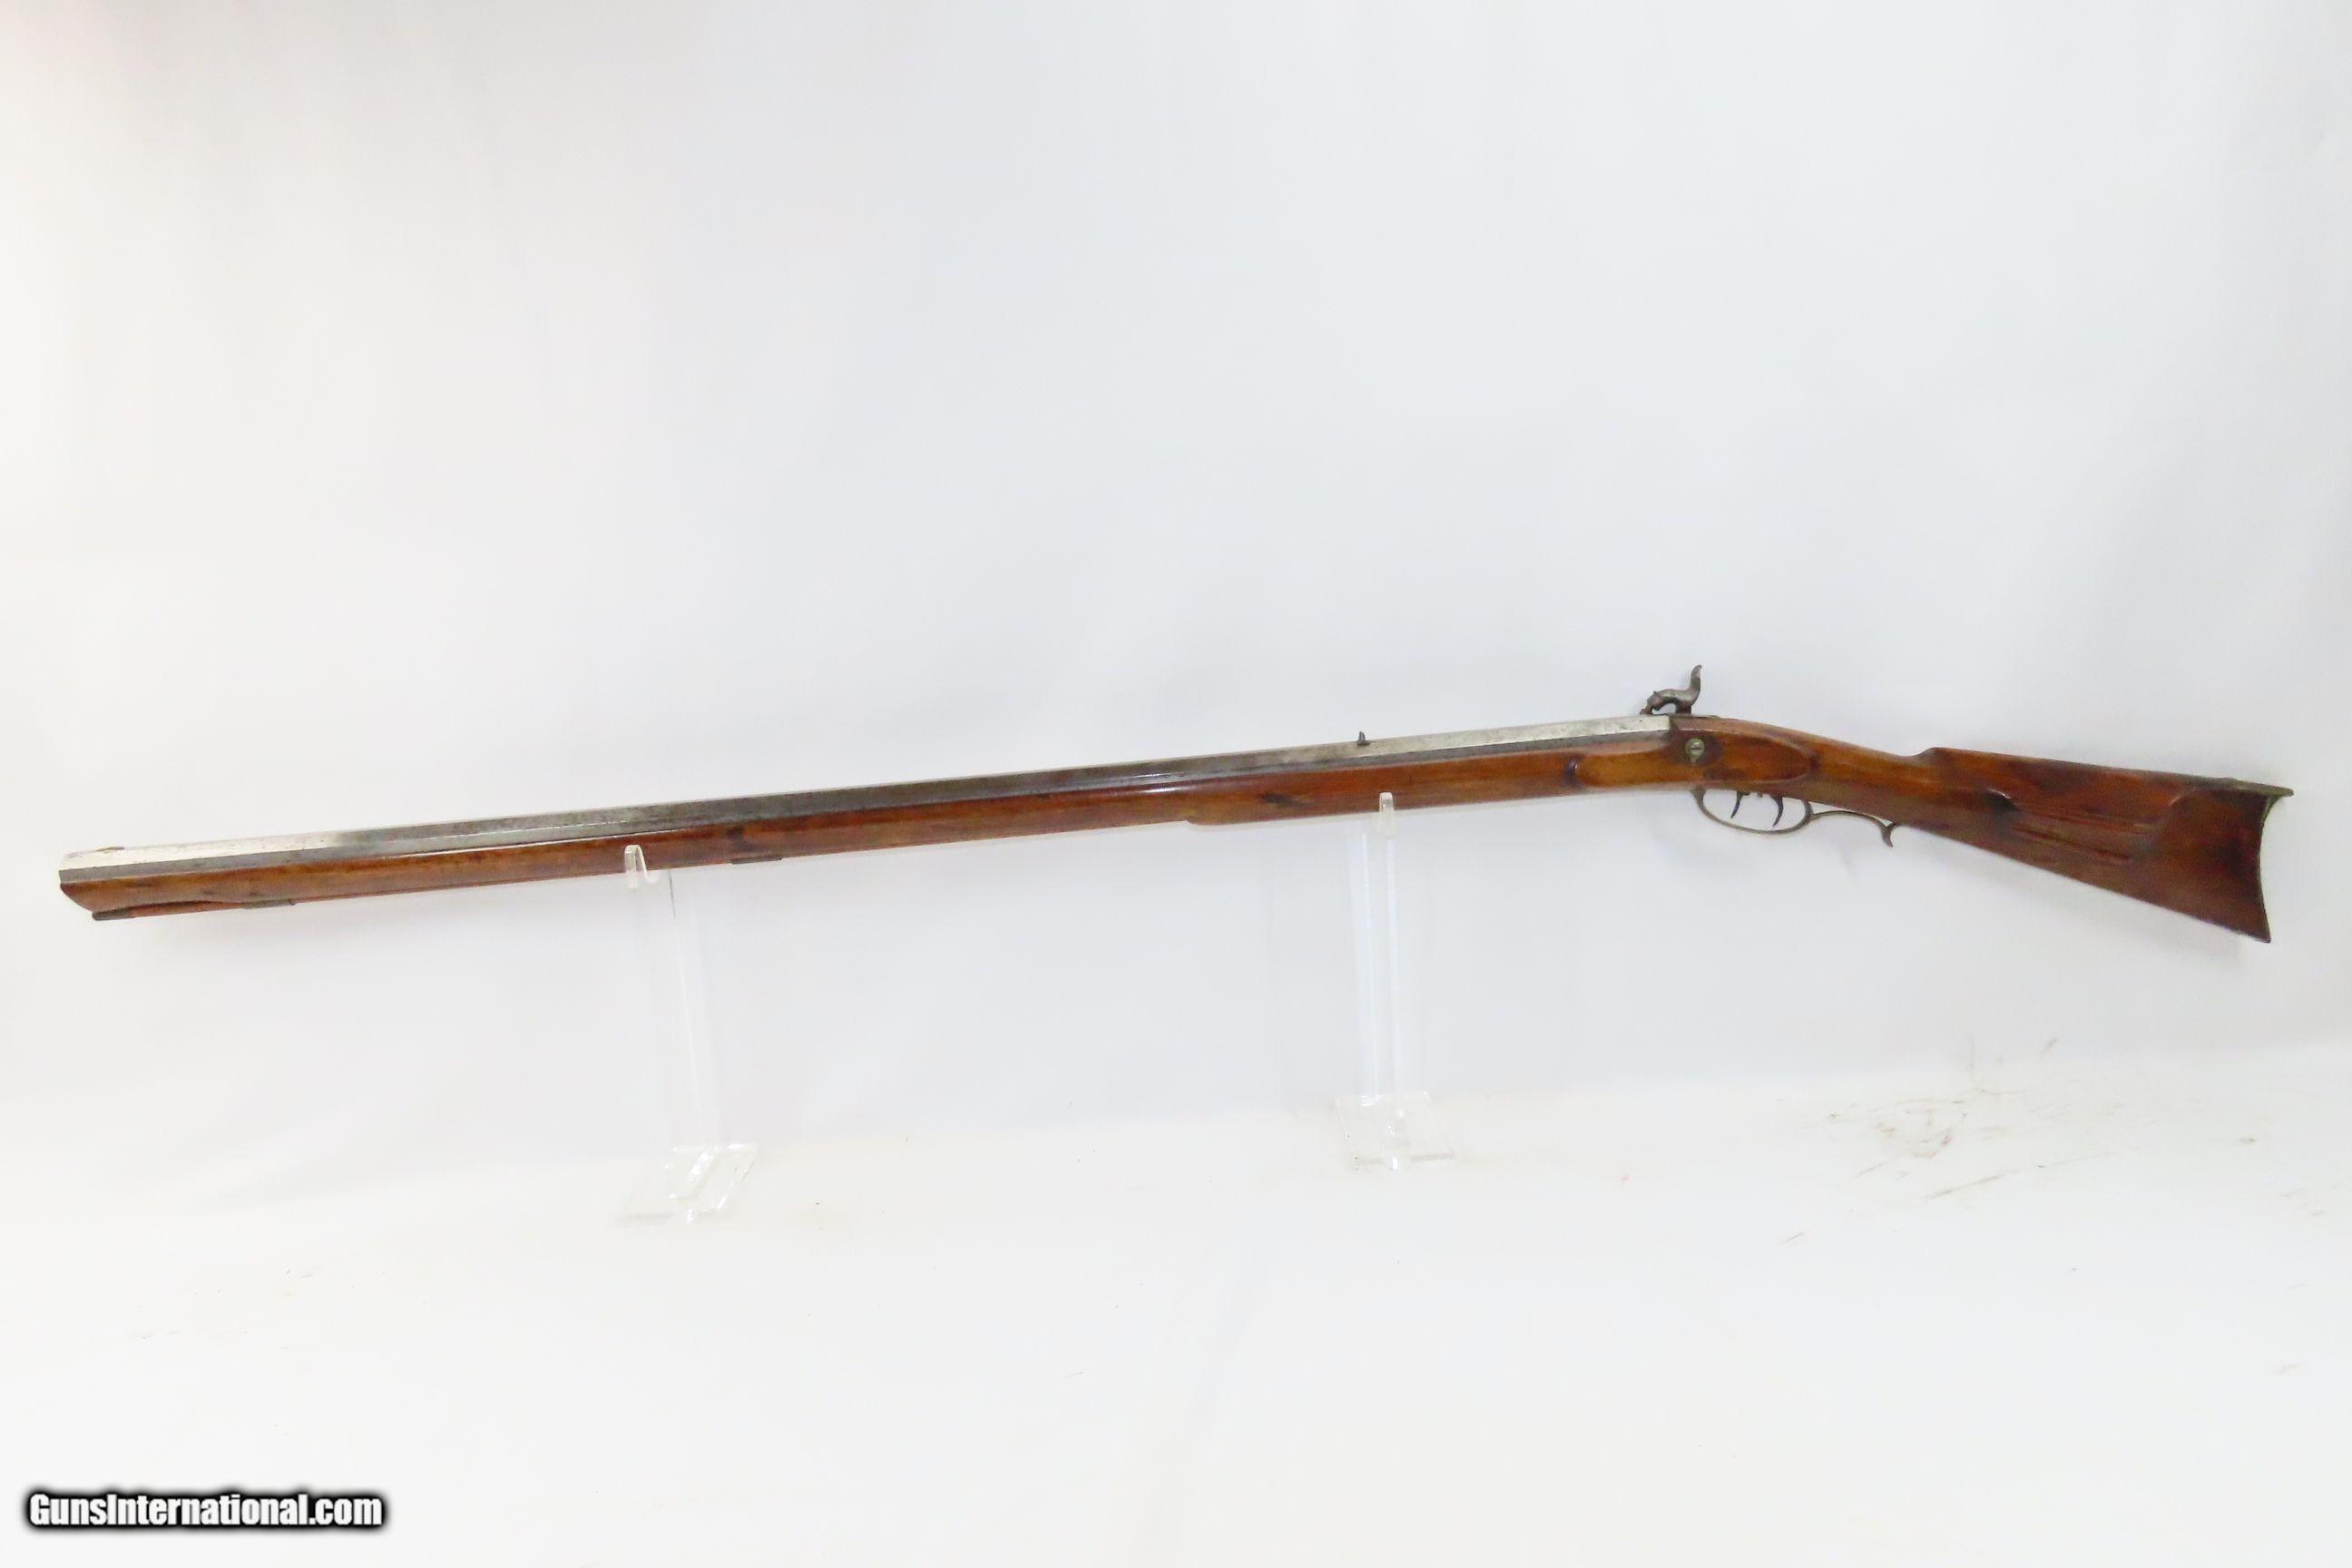 Antique PENNSYLVANIA RIFLE WORKS Full-Stock .40 Cal. Percussion LONG RIFLE  Kentucky Style HUNTING/HOMESTEAD American Long Rifle